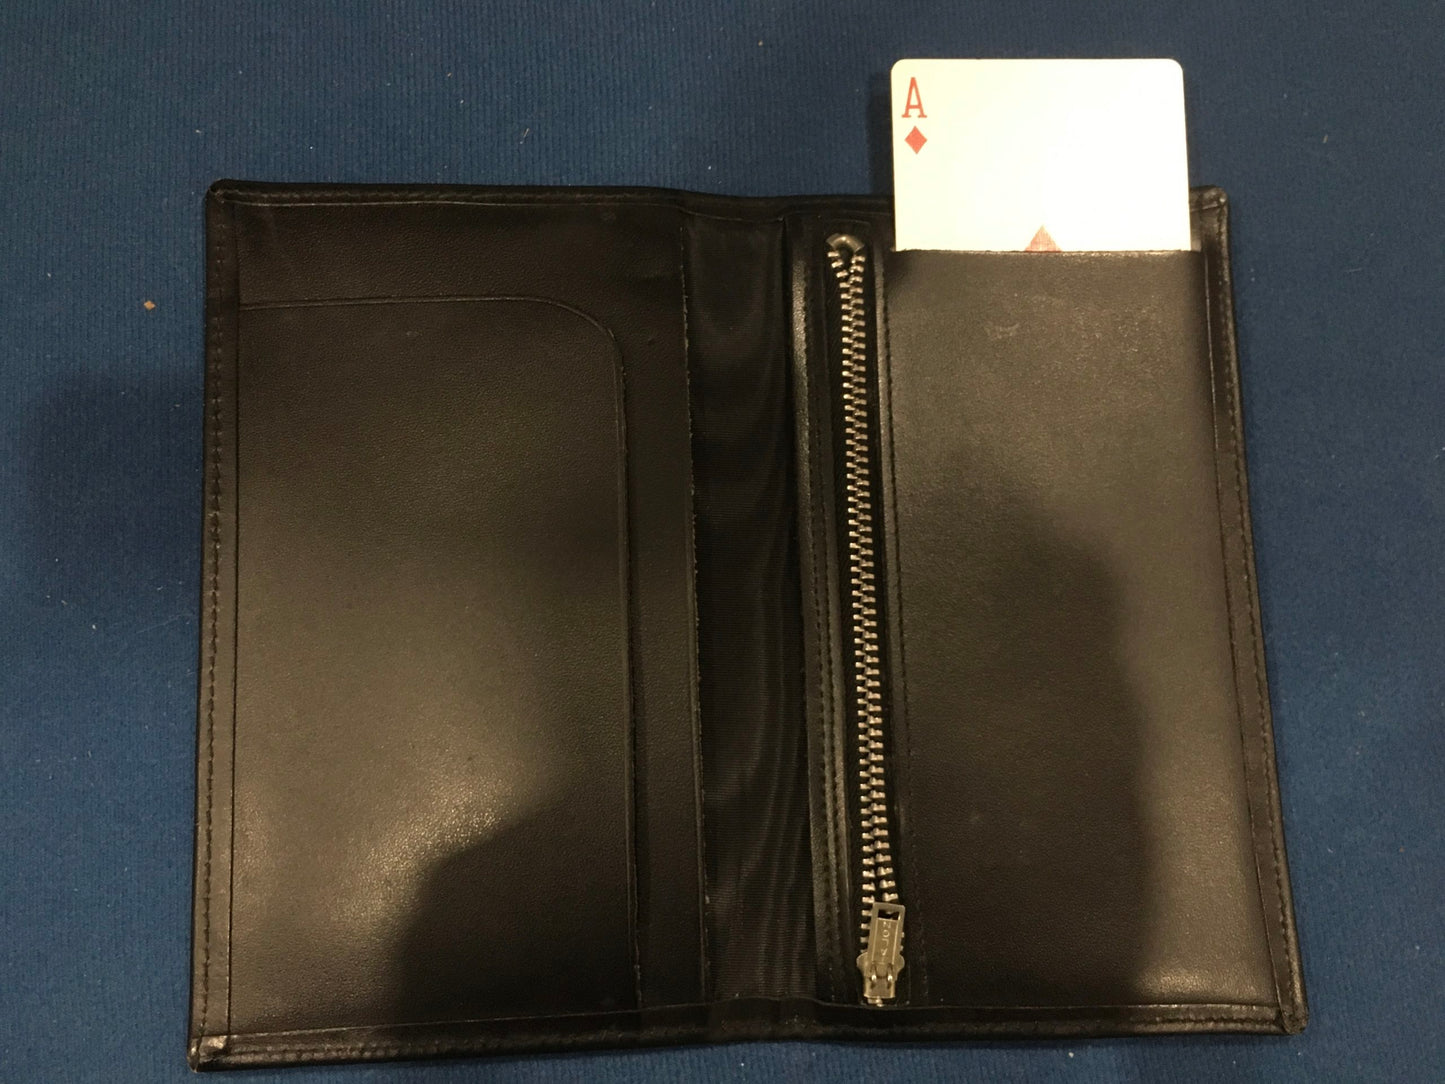 Magician's Wallet, used